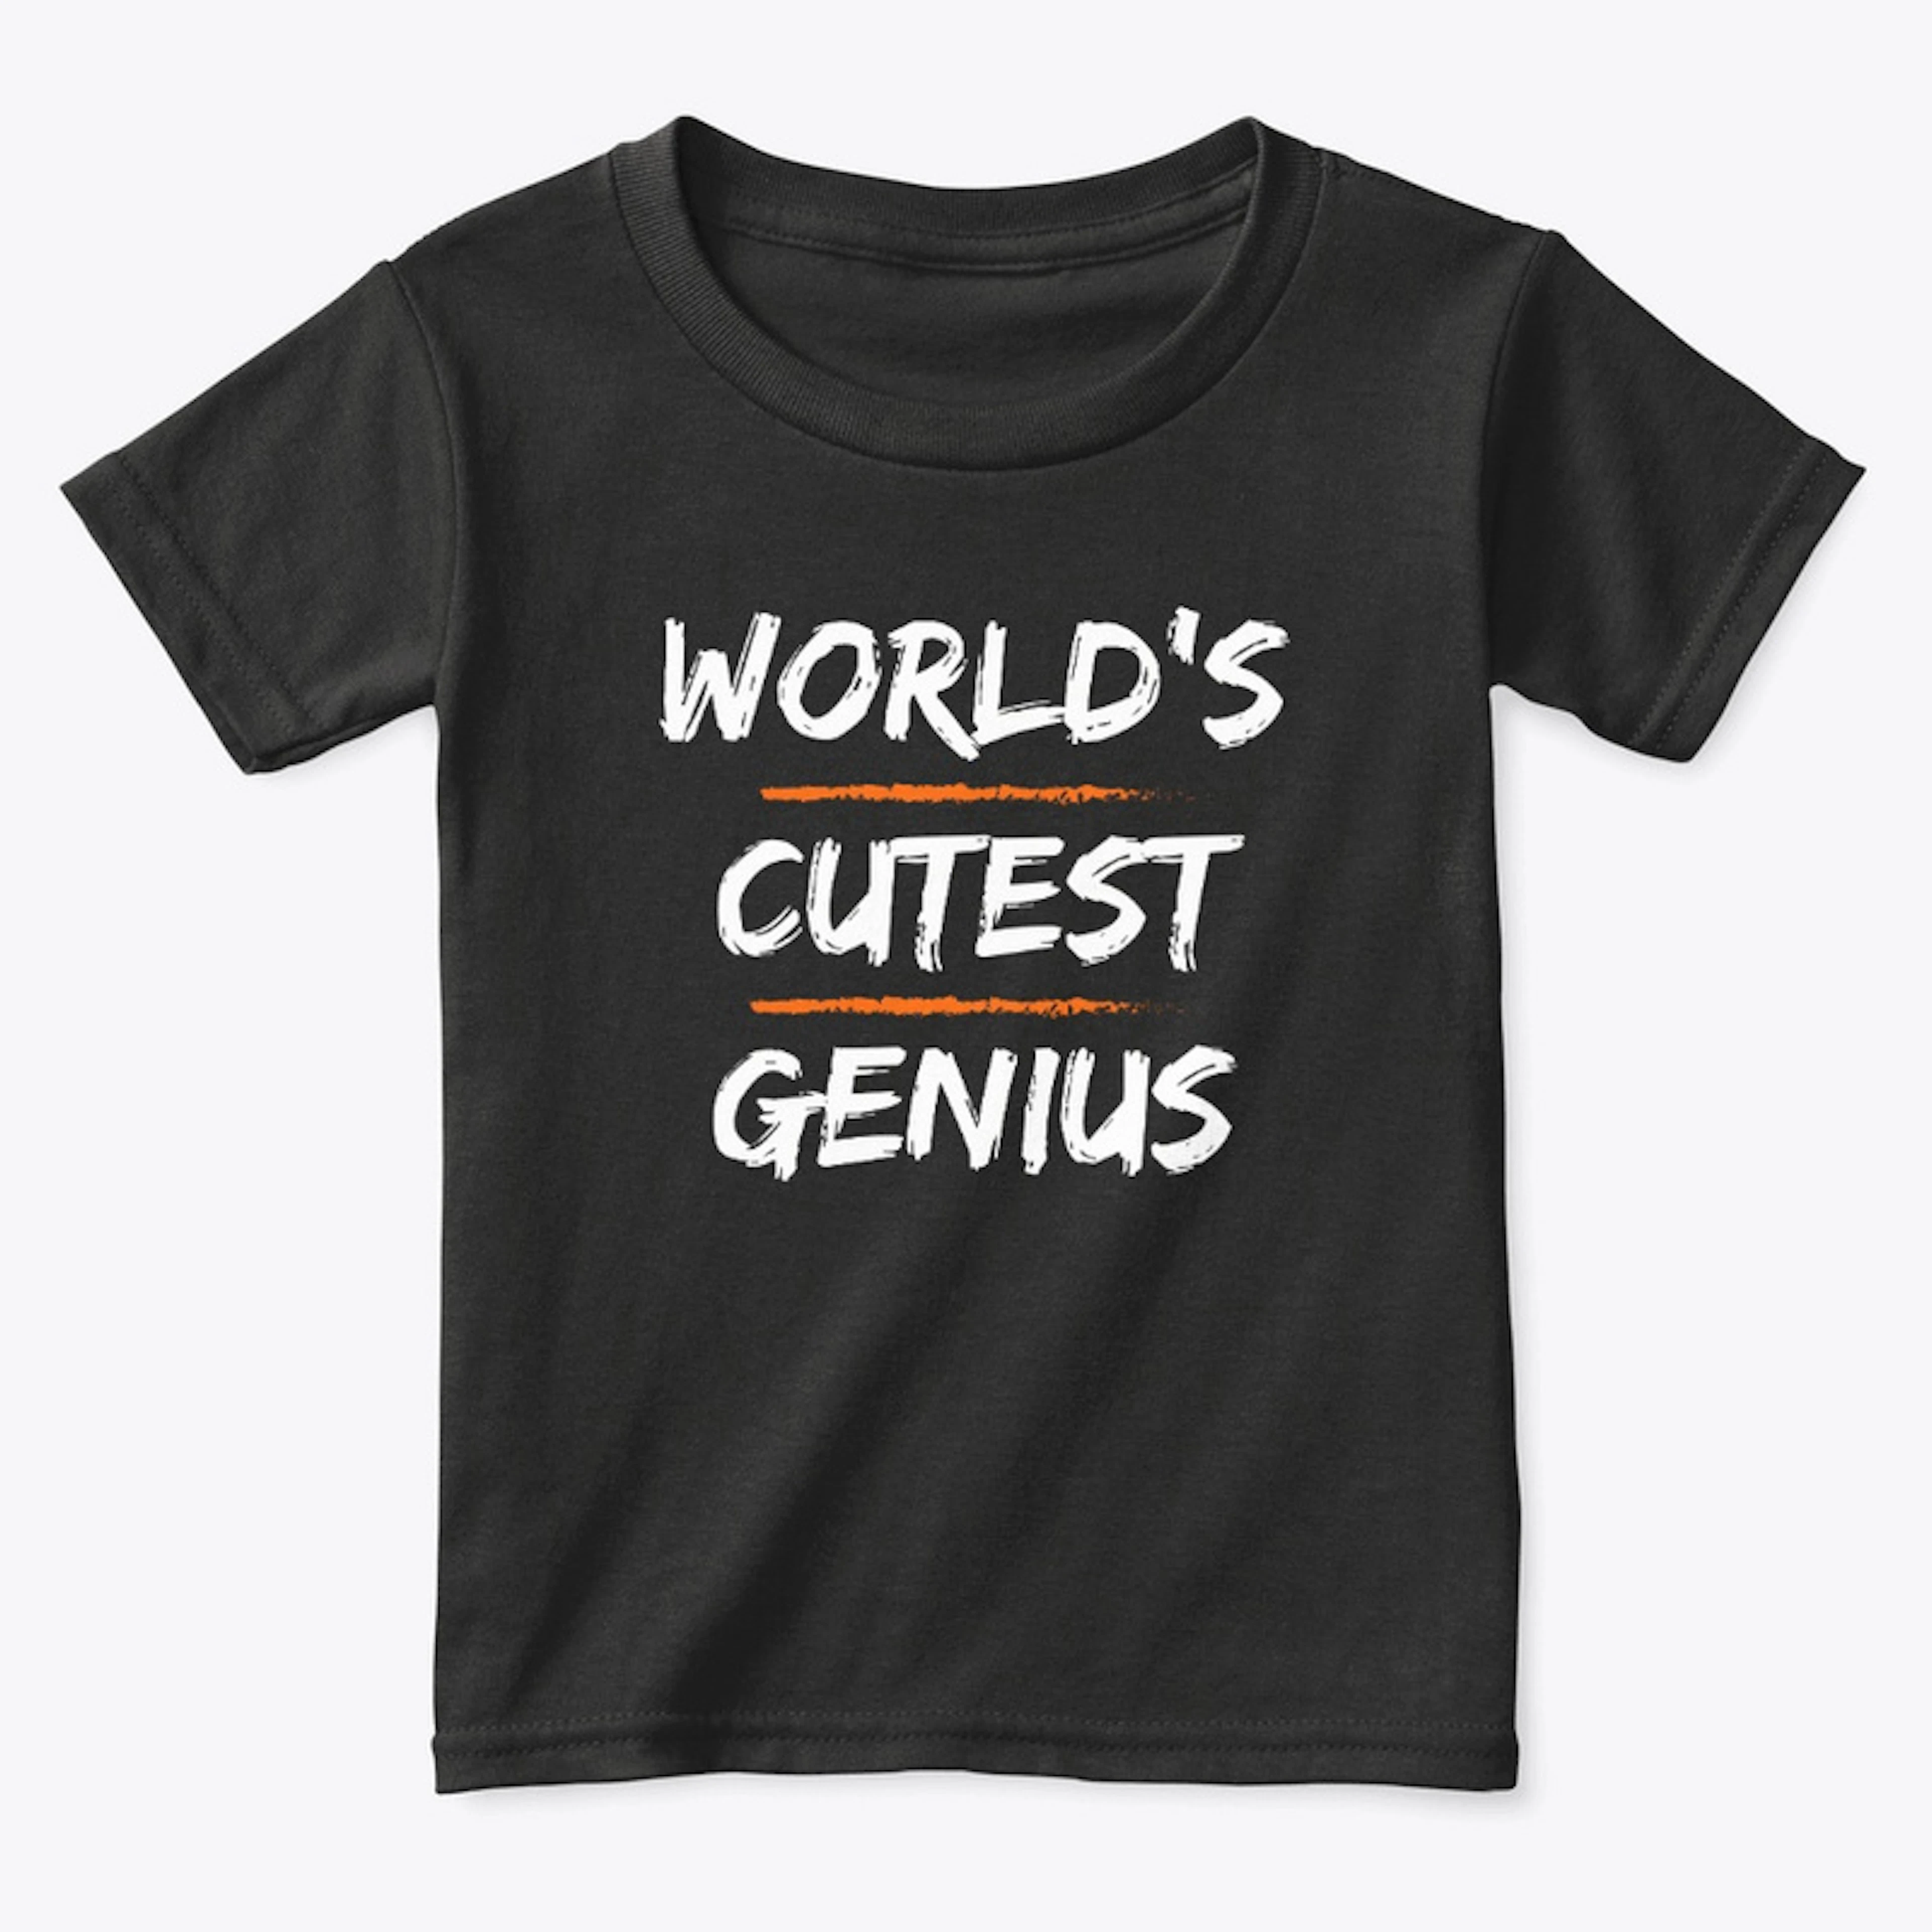 Beautiful T shirt Design For Toddlers!!!